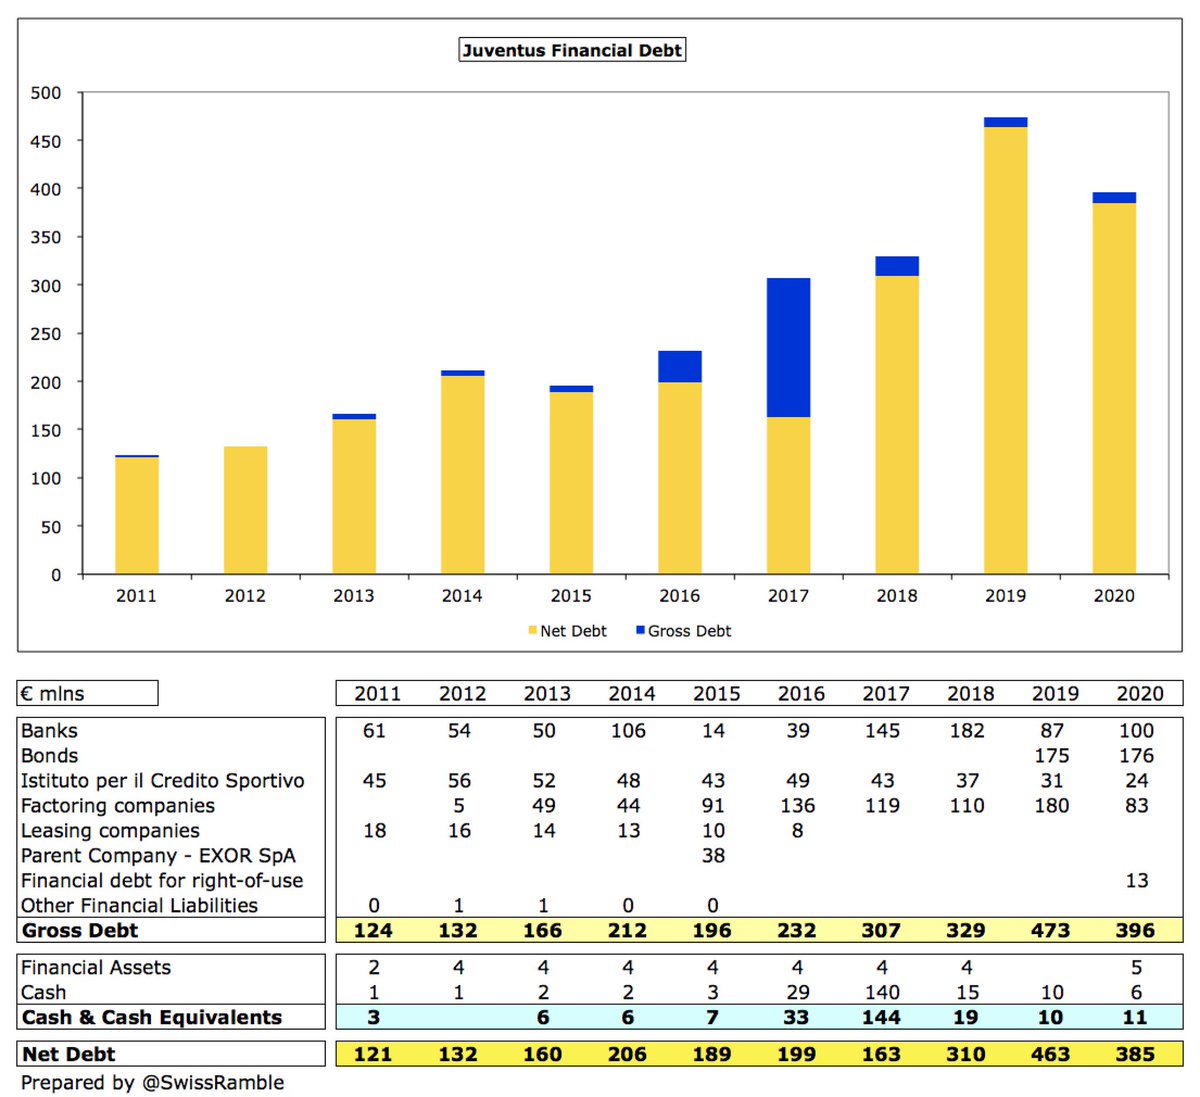  #Juventus gross financial debt decreased from €473m to €396m, including €176m bonds, as well as bank loans €100m, amounts owed to factoring companies €83m, Istituto per il Credito Sportivo €24m and other debt €13m. This has tripled since €132m in 2012.